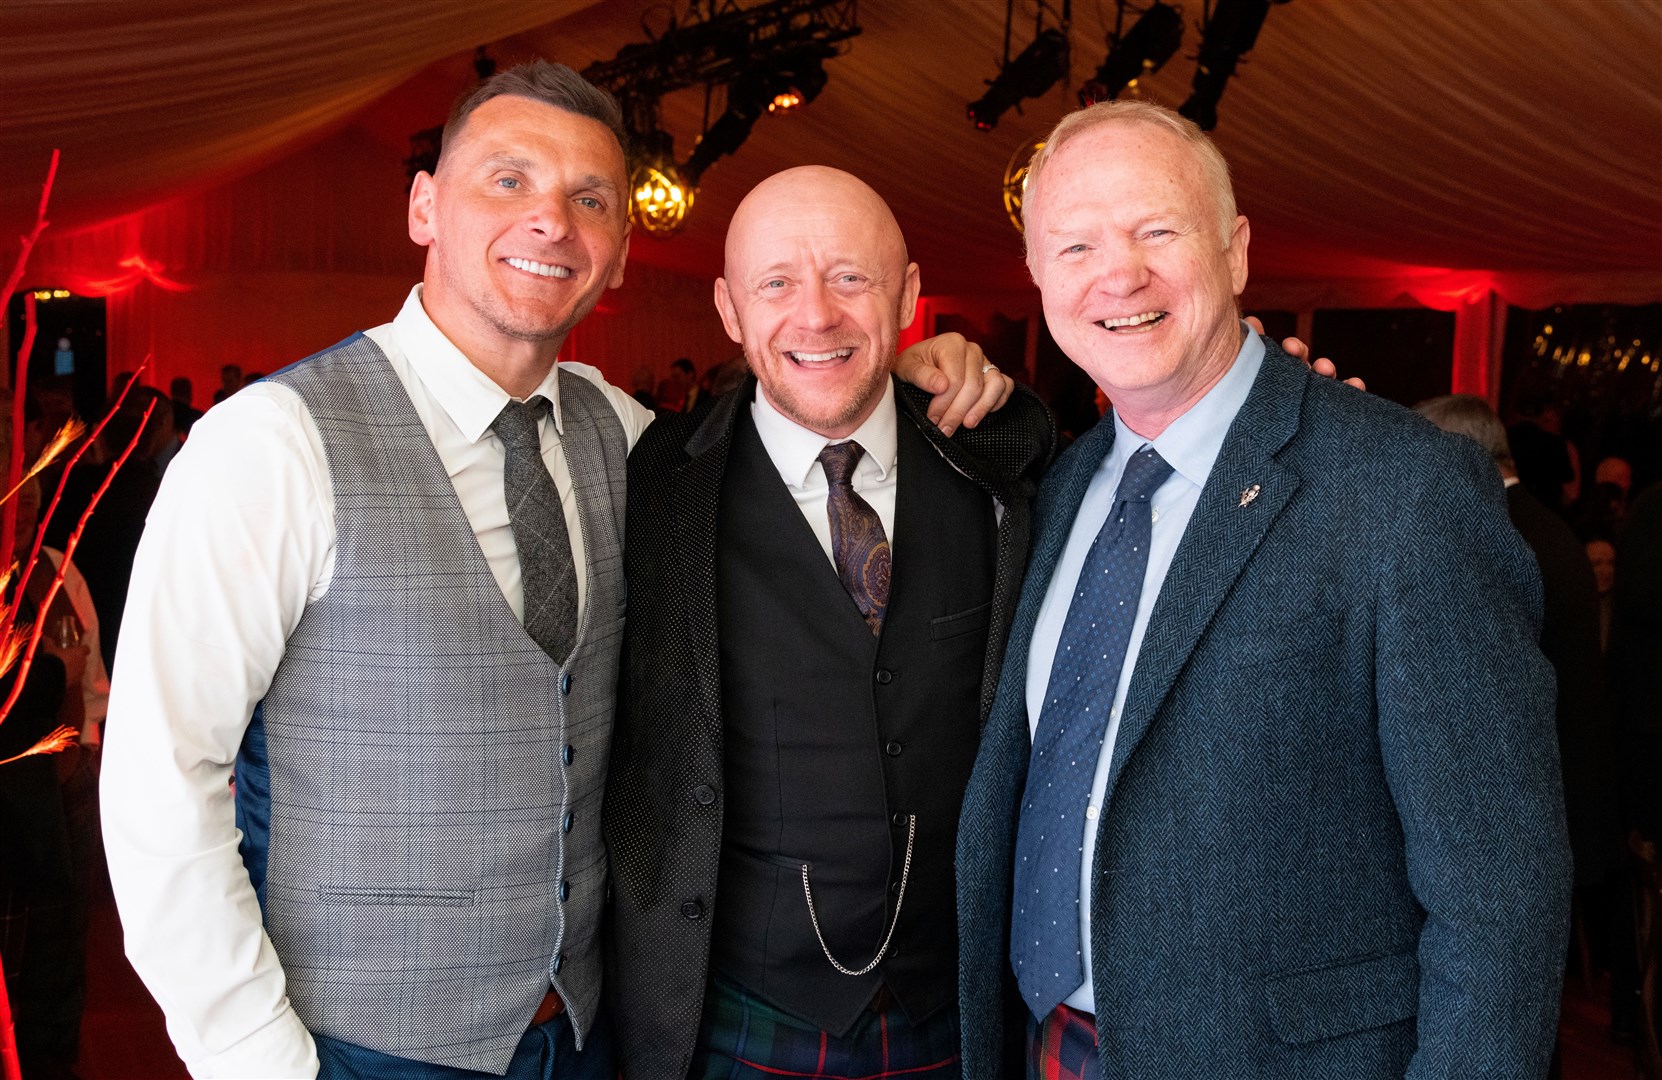 Having a ball at the Spirit of Speyside dinner, from left, former Rangers player Lee McCulloch, George McNeil (whisky festival chairman) and former Aberdeen legend and Rangers and Scotland manager Alex McLeish.Picture: Beth Taylor